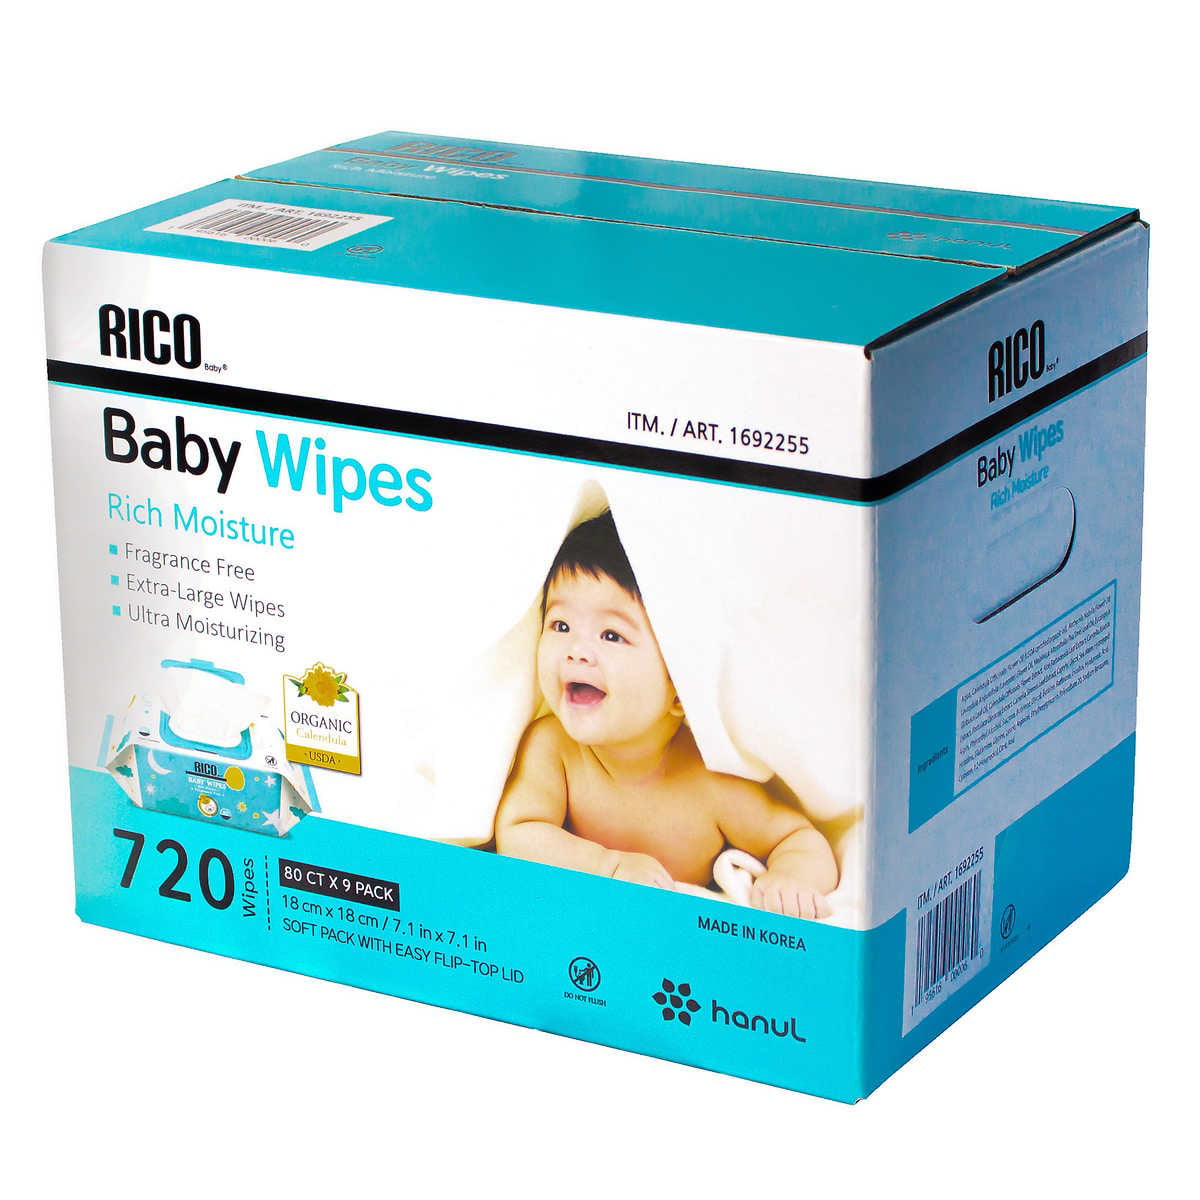 Kirkland Signature Baby Wipes 900-count Best Price! Fresh! Free Shipping! 